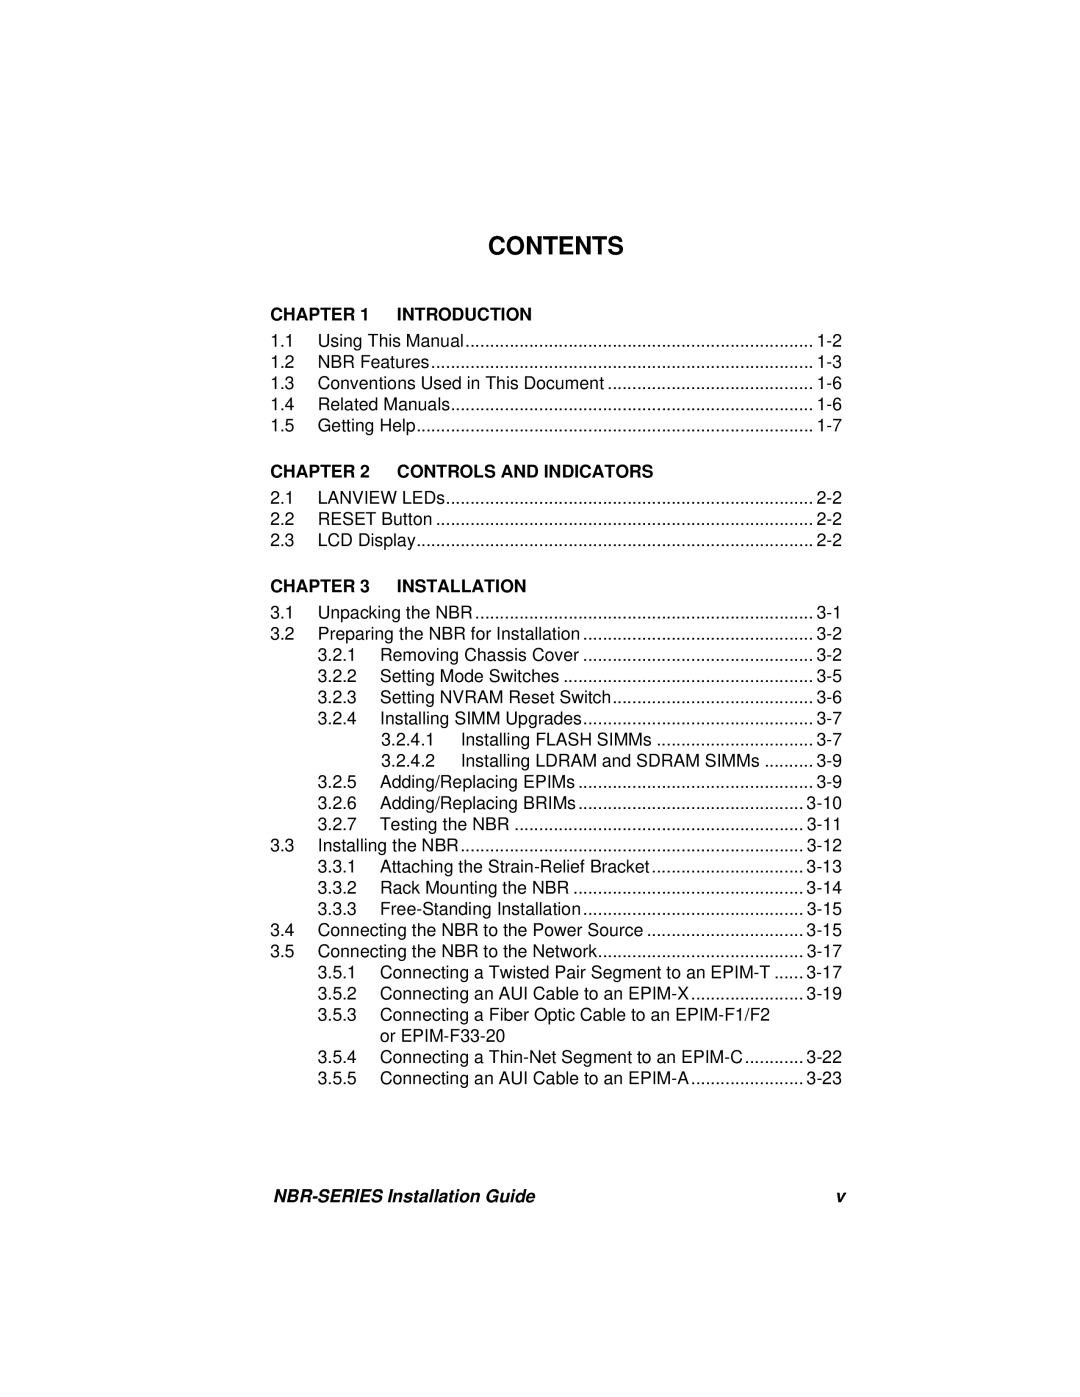 Cabletron Systems NBR-420, NBR-220, NBR-620 manual Contents, Chapter, Introduction, Controls And Indicators, Installation 